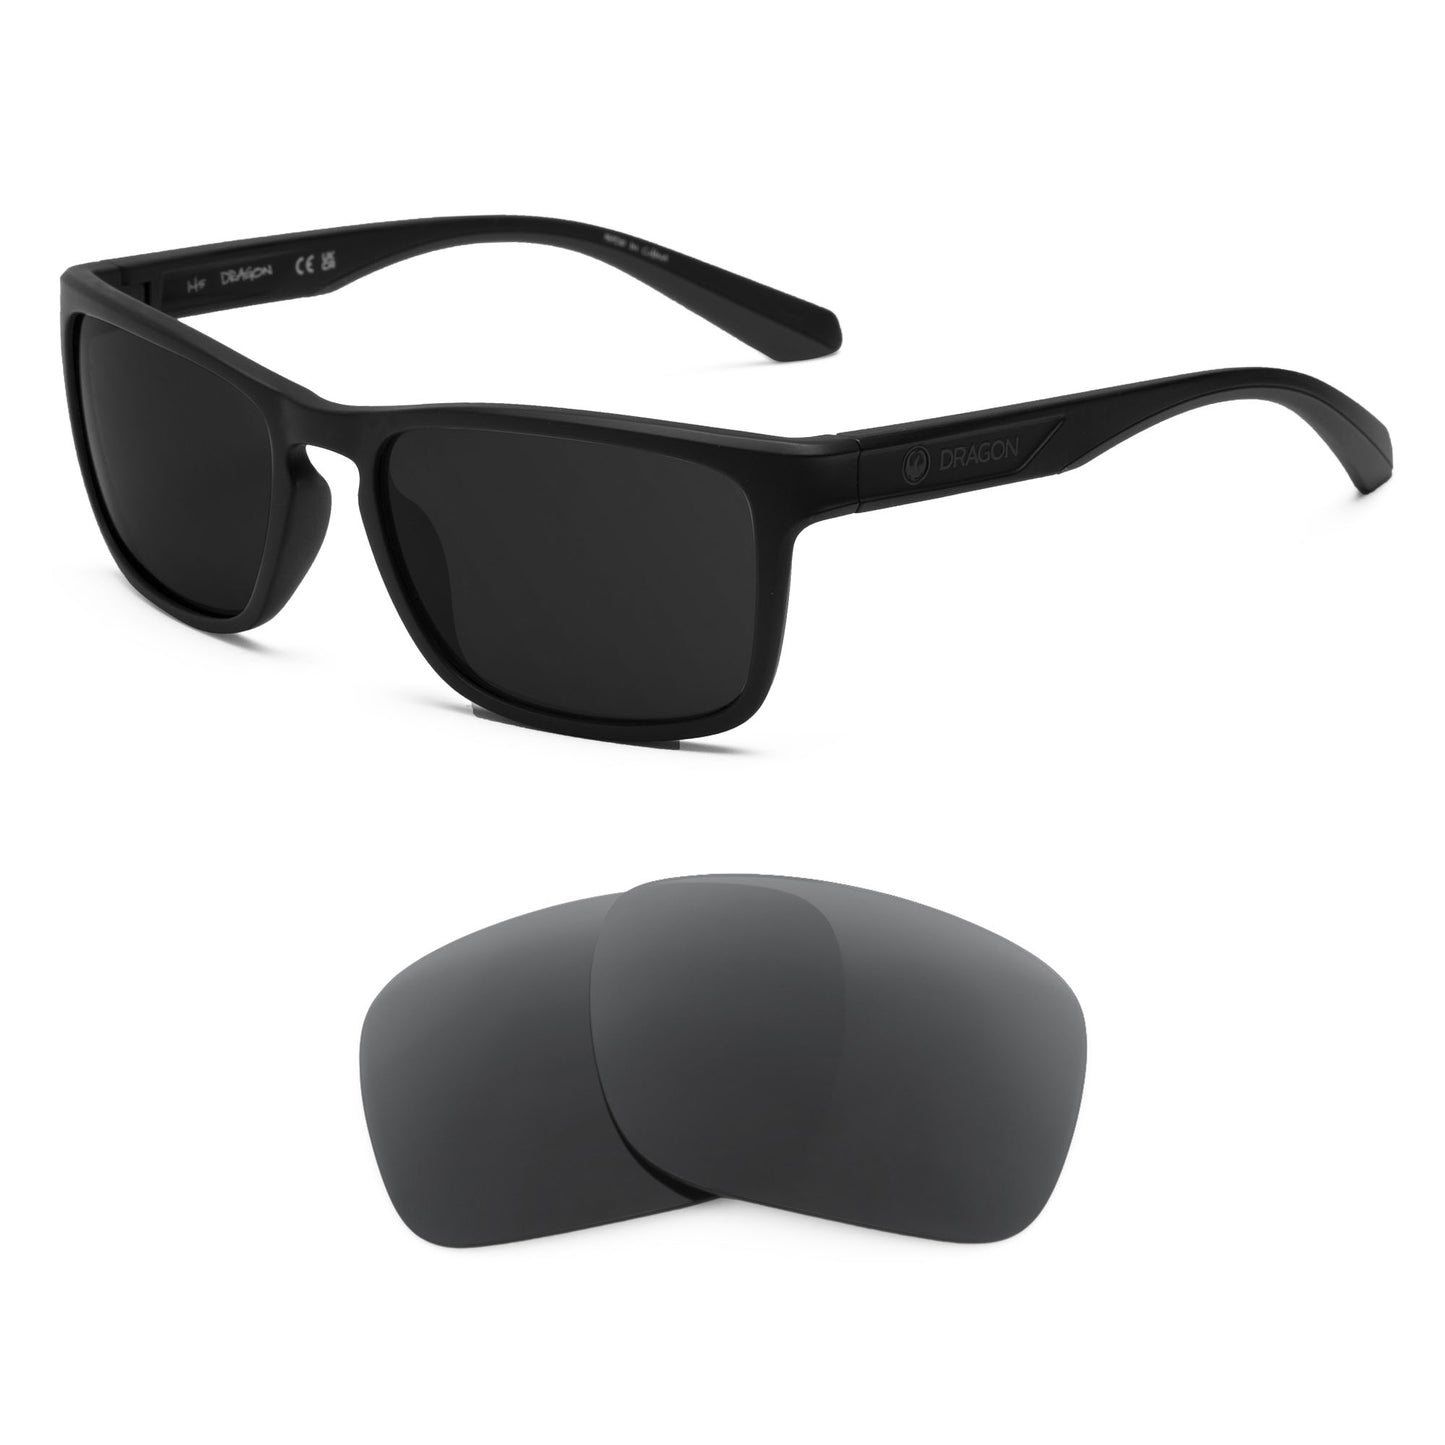 Dragon Blaise sunglasses with replacement lenses